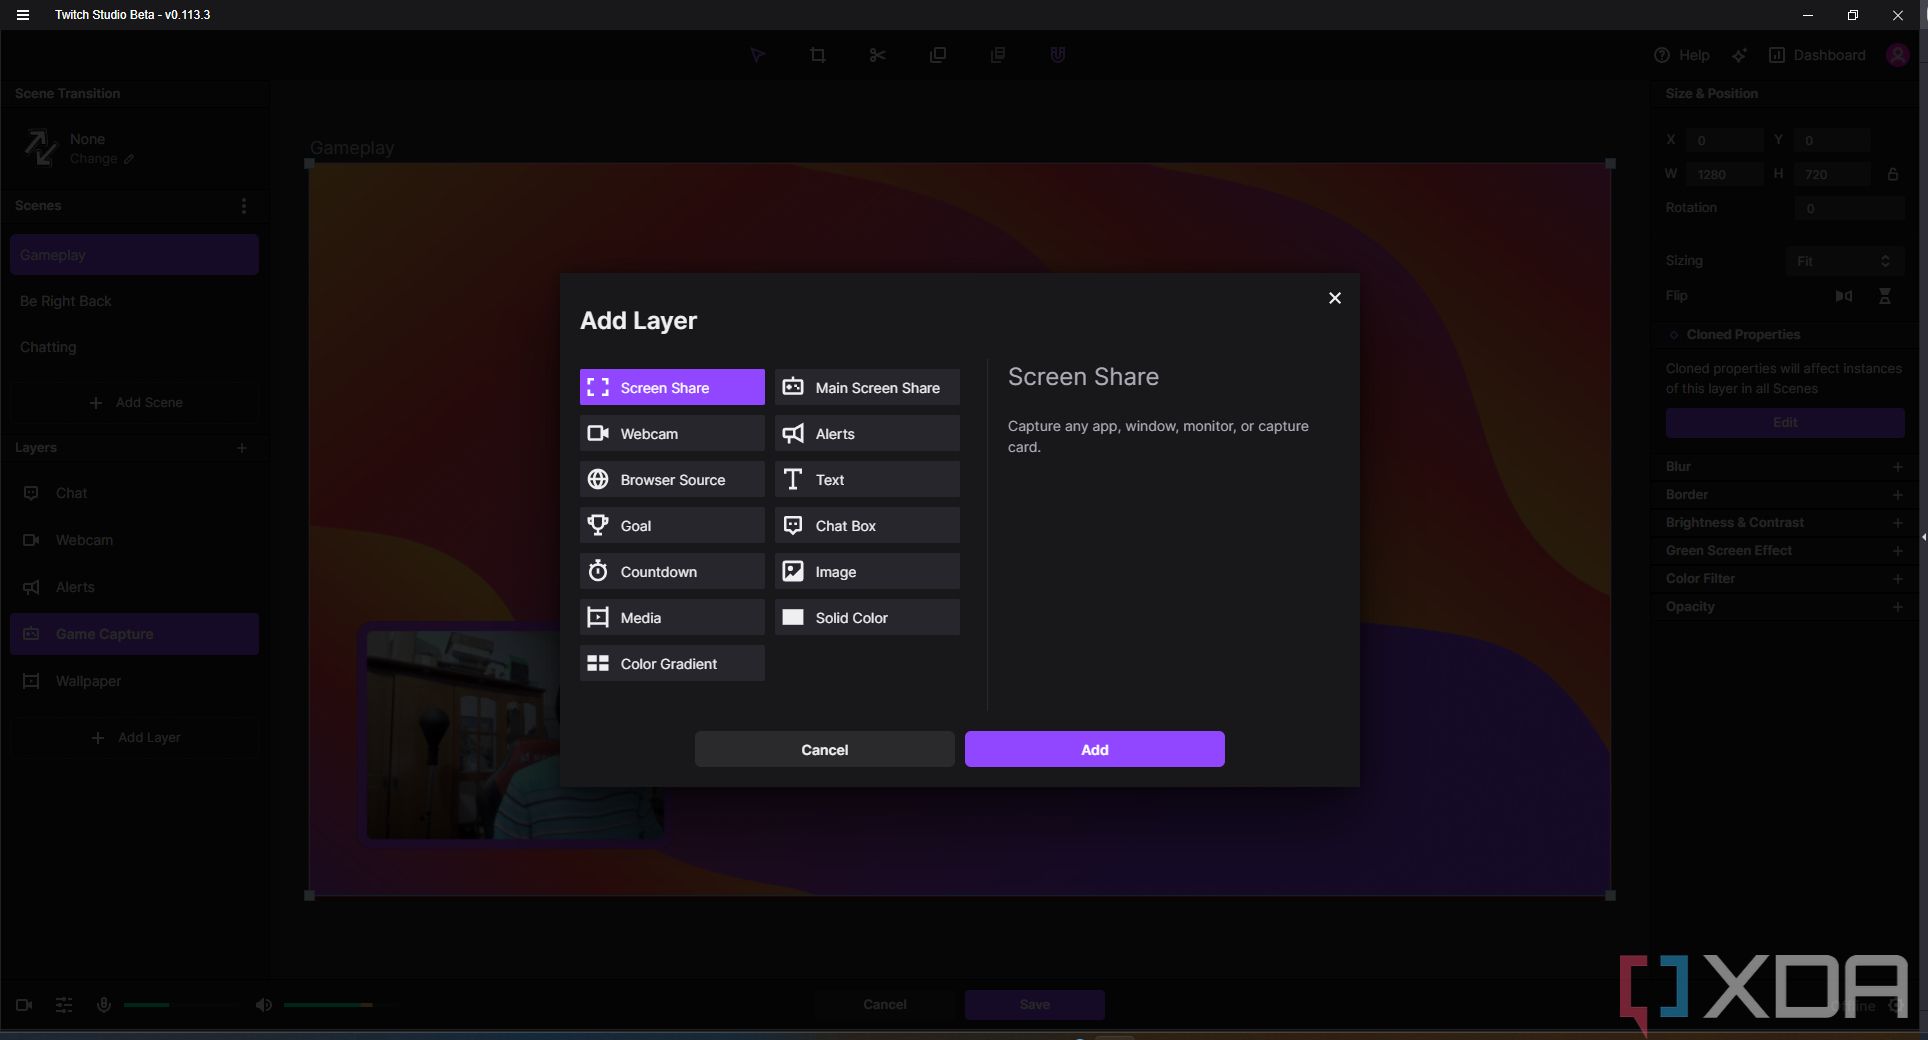 Screenshot of the Add Layer interface in Twitch Studio showing various types of soruces that can be added